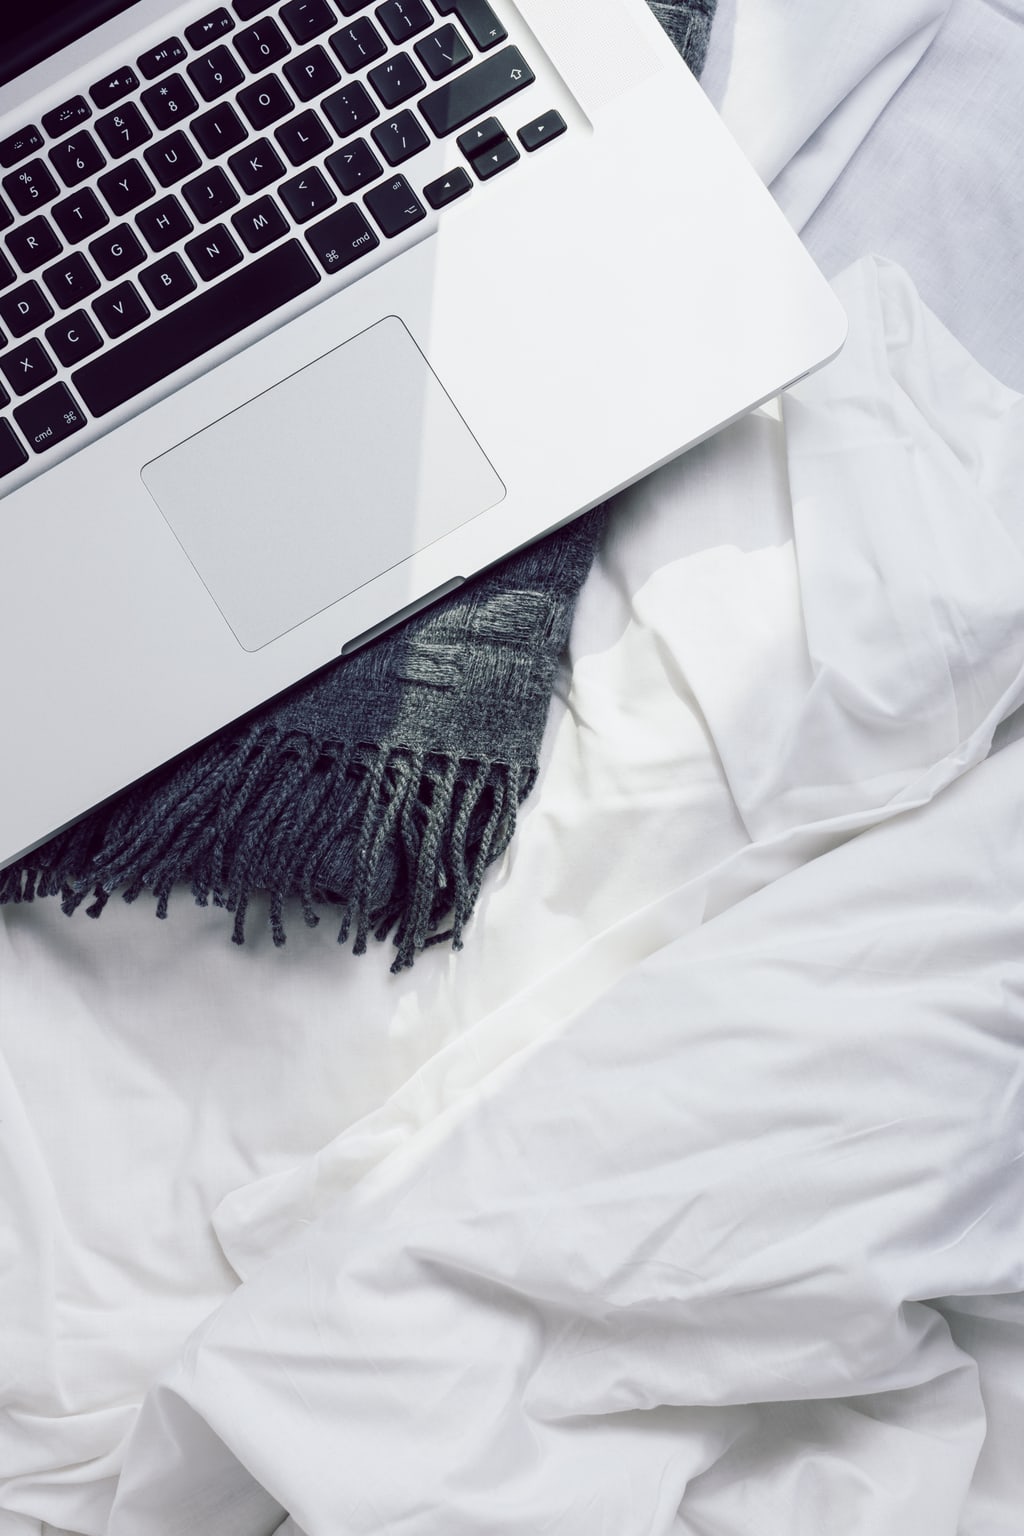 Laptop on a bed - self care lessons from chronic illness